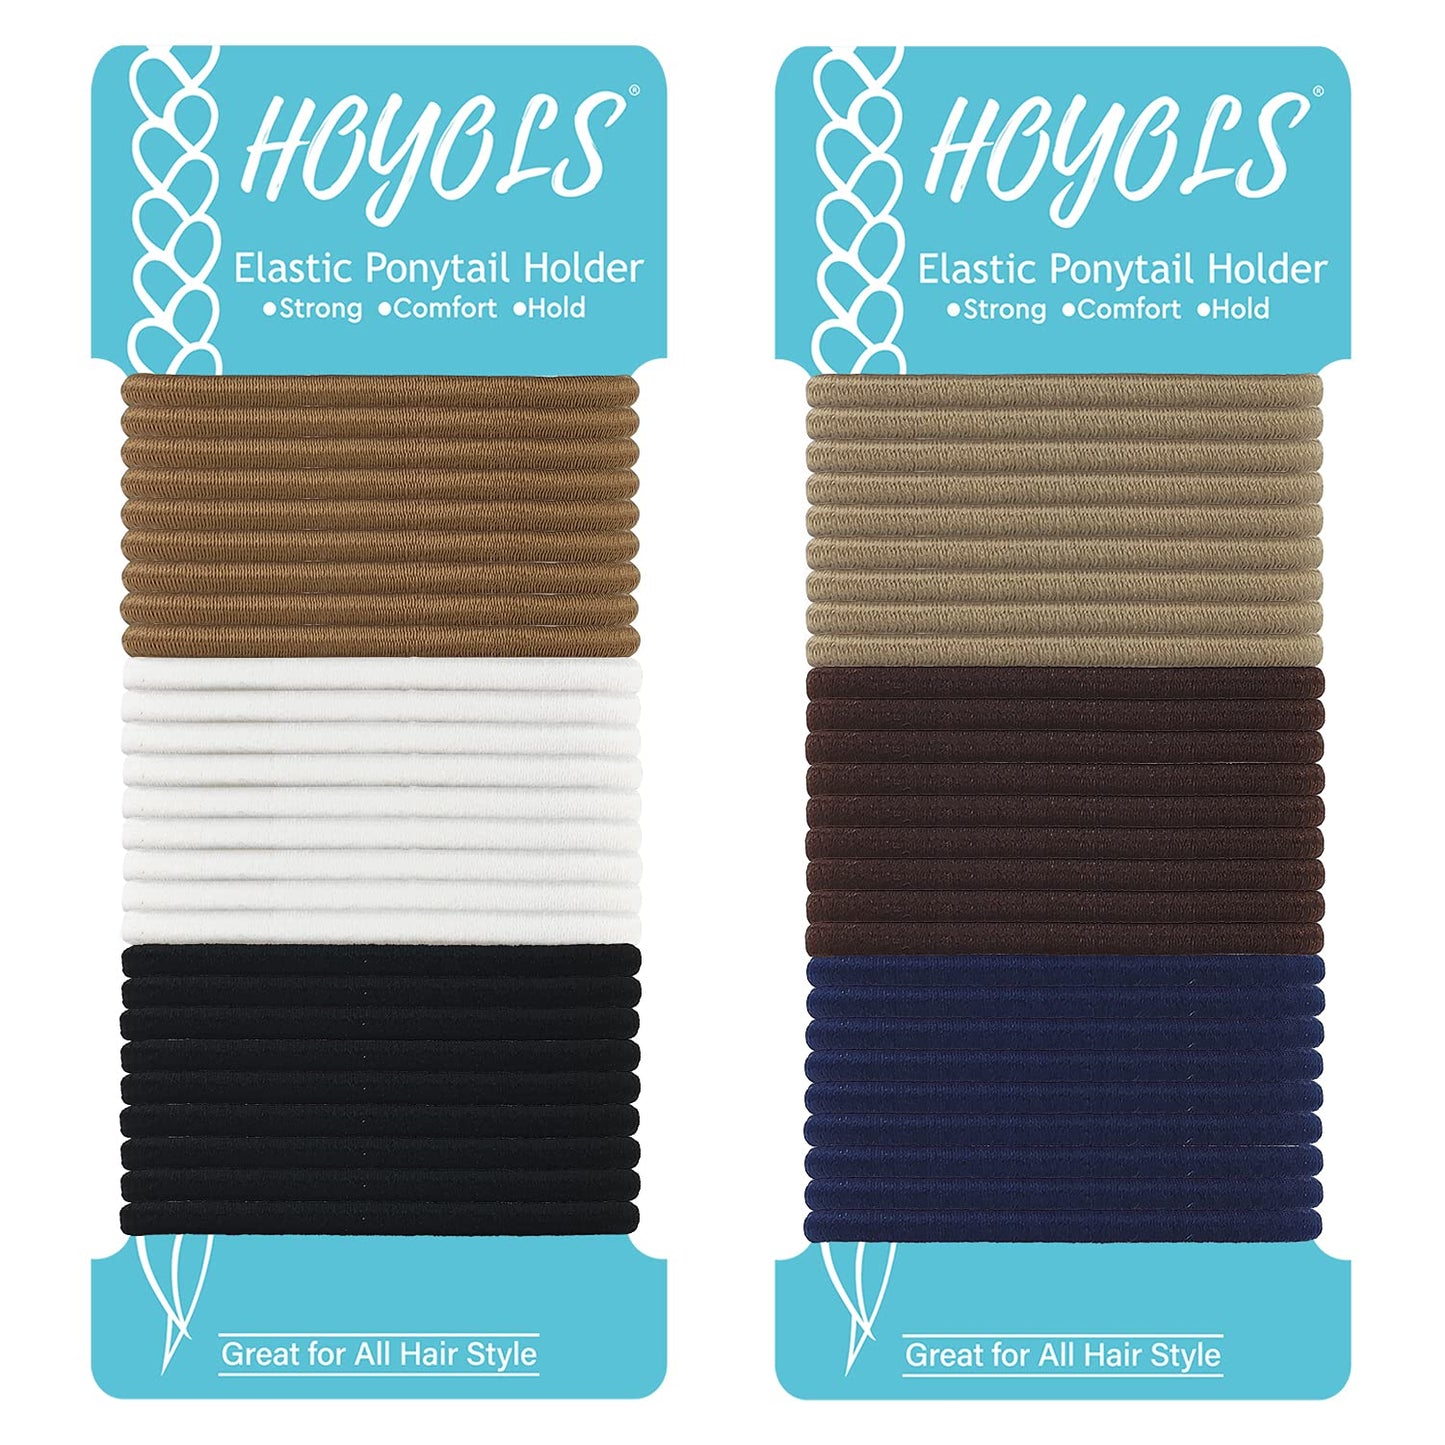 HOYOLS No Metal Hair Elastics Bands Assorted Color for Women’s Medium Thick Hair 4mm, Ponytail Holder Gentle Hold No Snag Hair Ties Accessories 6 Colors 56 Count (Basic)